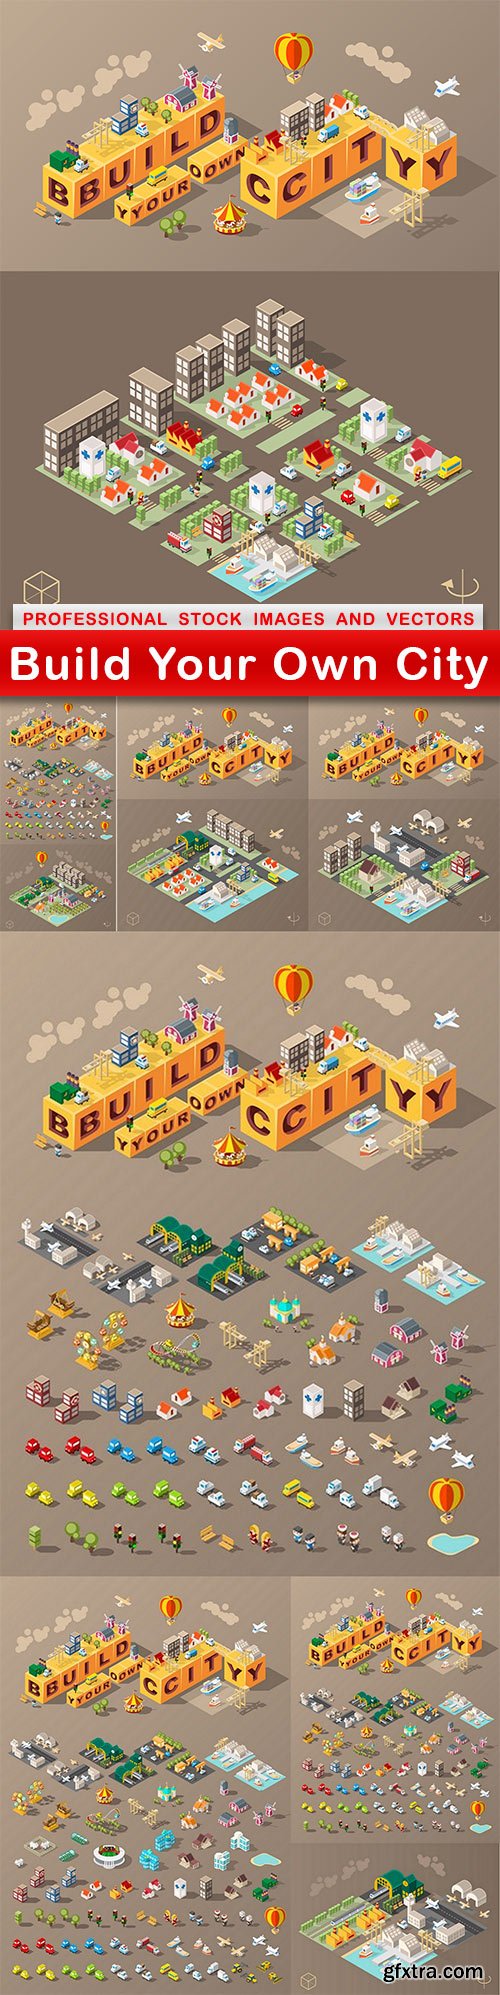 Build Your Own City - 7 EPS